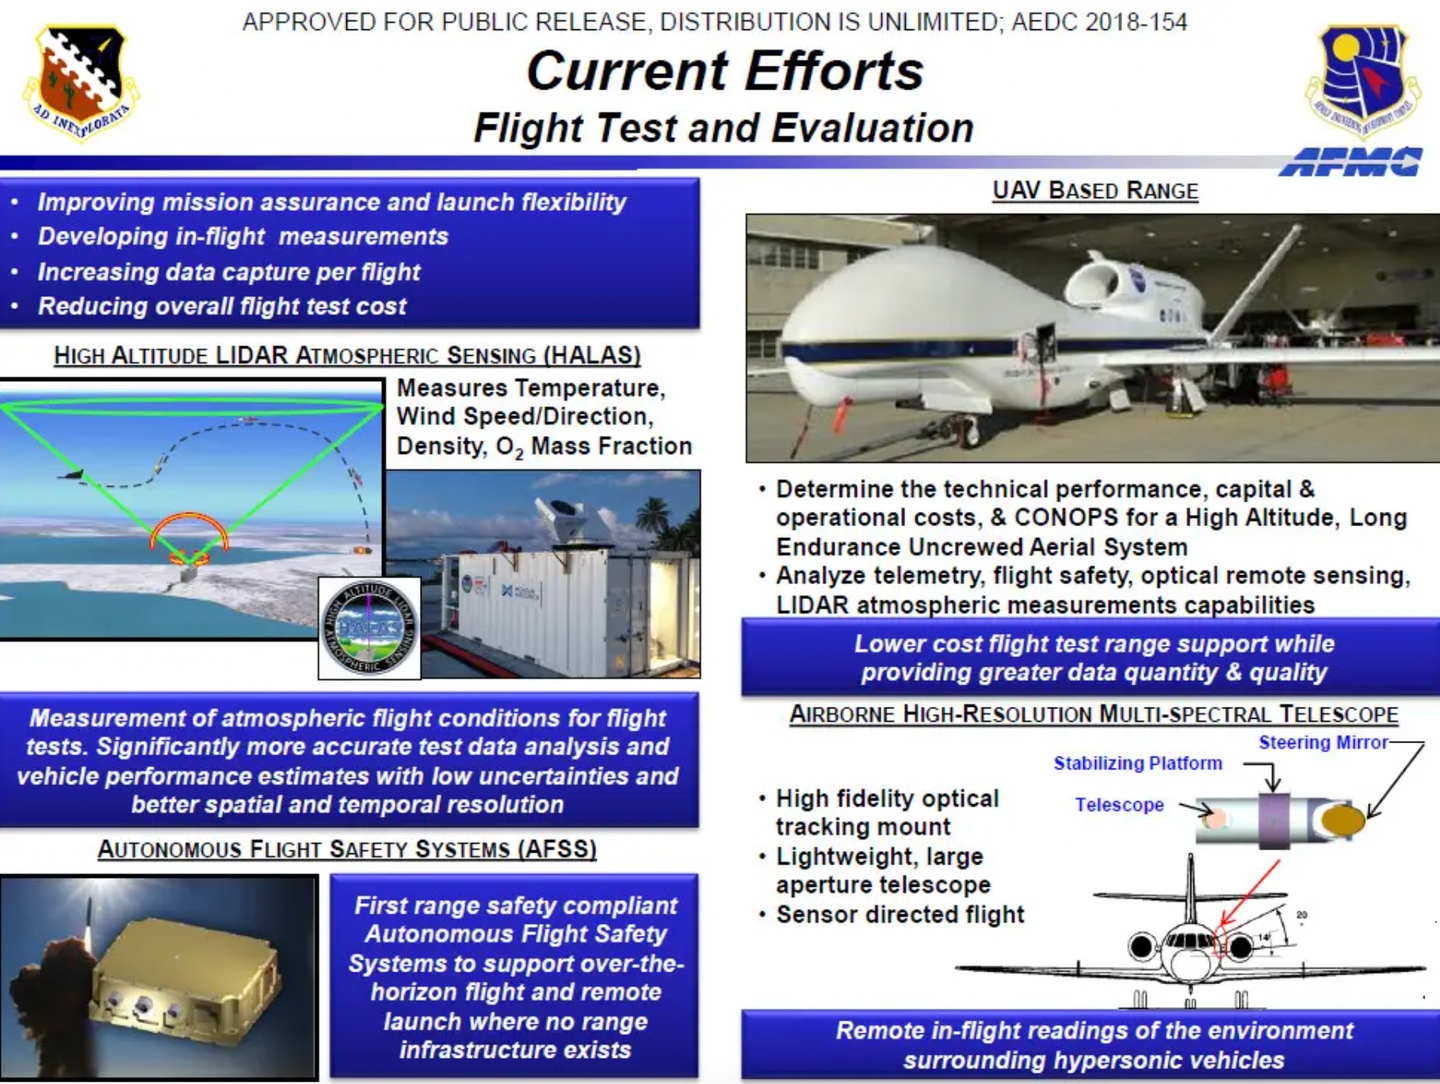 A briefing slide from 2018 showing various efforts the U.S. Air Force was conducting at the time to improve hypersonic flight test capabilities.&nbsp;<em>U.S. Air Force </em>